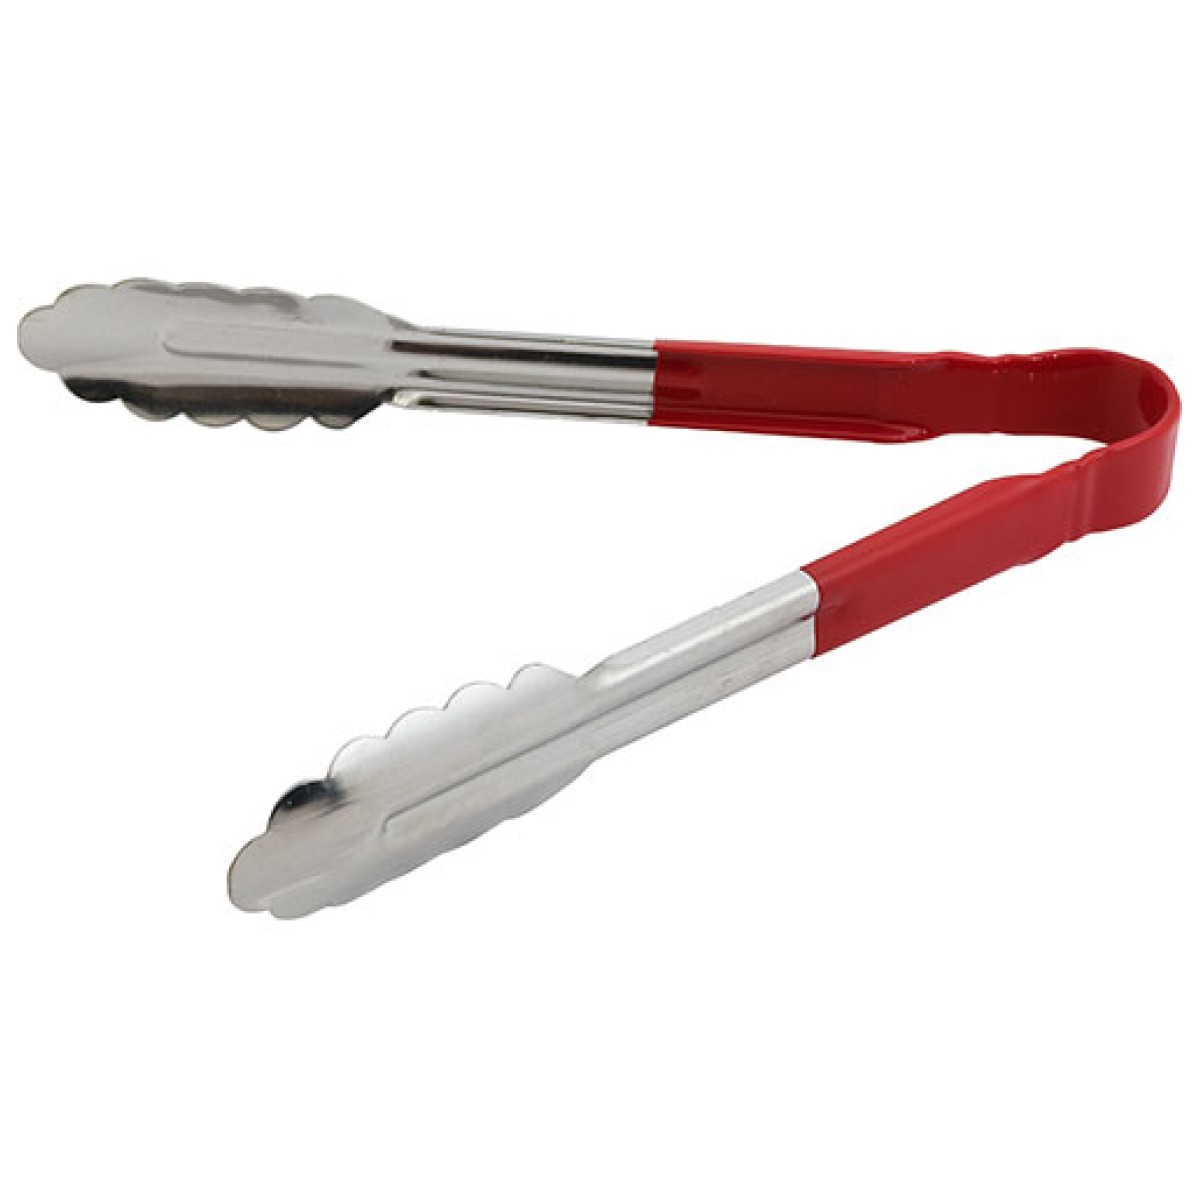 TONGS - 300mm S S PLASTIC H GRIP    RED